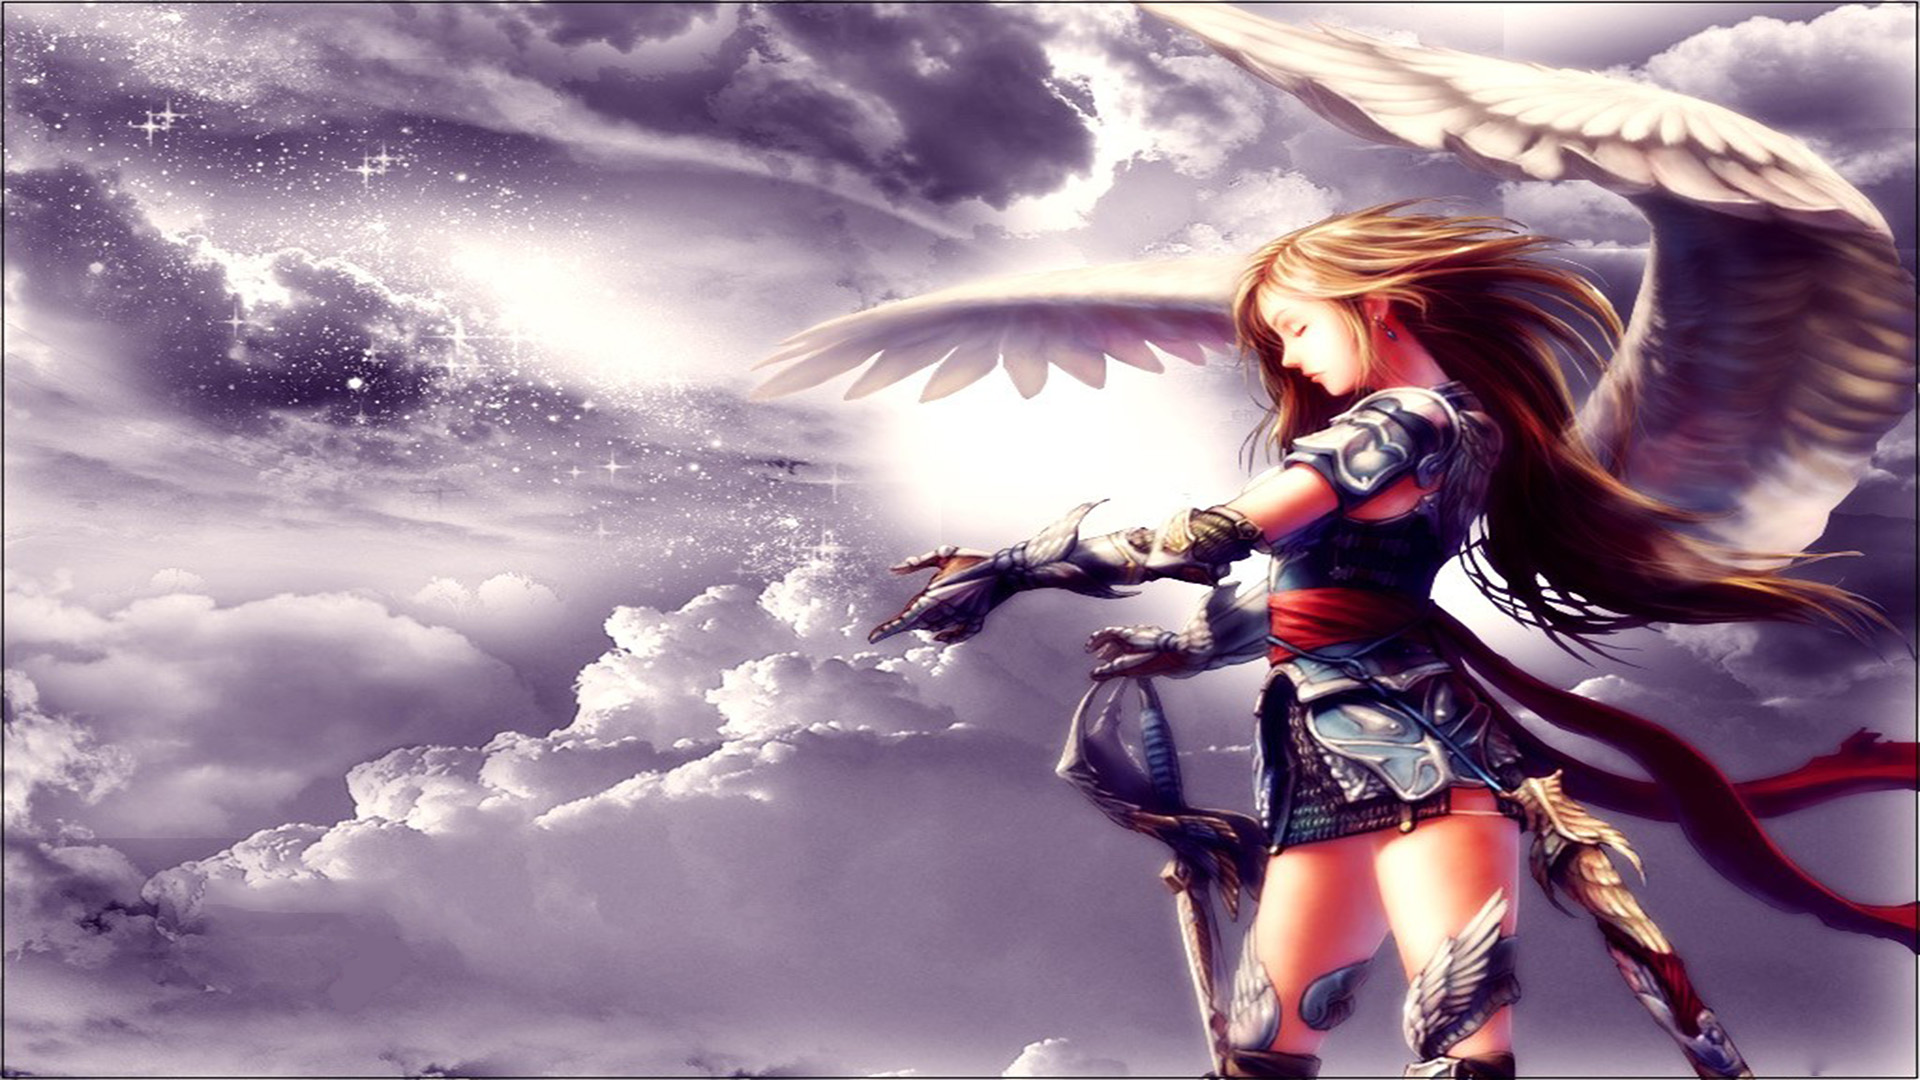 Free Download Pin Anime Angel Wallpaper X For Your Desktop Mobile Tablet Explore